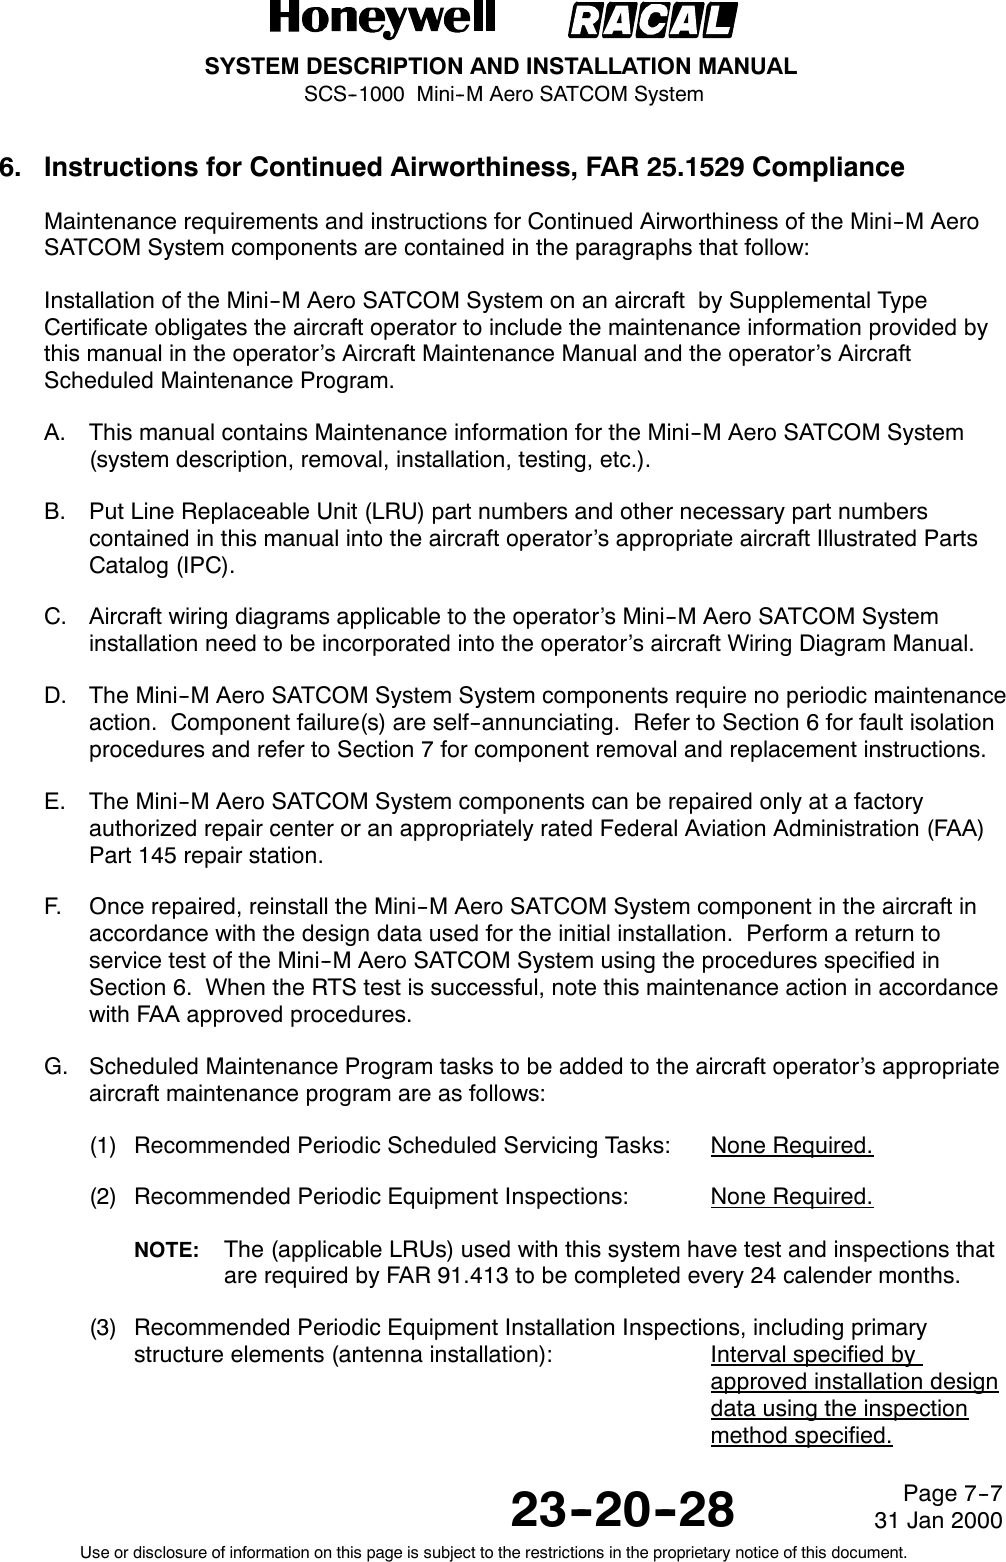 SYSTEM DESCRIPTION AND INSTALLATION MANUALSCS--1000 Mini--M Aero SATCOM System23--20--28Use or disclosure of information on this page is subject to the restrictions in the proprietary notice of this document.Page 7--731 Jan 20006. Instructions for Continued Airworthiness, FAR 25.1529 ComplianceMaintenance requirements and instructions for Continued Airworthiness of the Mini--M AeroSATCOM System components are contained in the paragraphs that follow:Installation of the Mini--M Aero SATCOM System on an aircraft by Supplemental TypeCertificate obligates the aircraft operator to include the maintenance information provided bythis manual in the operator’s Aircraft Maintenance Manual and the operator’s AircraftScheduled Maintenance Program.A. This manual contains Maintenance information for the Mini--M Aero SATCOM System(system description, removal, installation, testing, etc.).B. Put Line Replaceable Unit (LRU) part numbers and other necessary part numberscontained in this manual into the aircraft operator’s appropriate aircraft Illustrated PartsCatalog (IPC).C. Aircraft wiring diagrams applicable to the operator’s Mini--M Aero SATCOM Systeminstallation need to be incorporated into the operator’s aircraft Wiring Diagram Manual.D. The Mini--M Aero SATCOM System System components require no periodic maintenanceaction. Component failure(s) are self--annunciating. Refer to Section 6 for fault isolationprocedures and refer to Section 7 for component removal and replacement instructions.E. The Mini--M Aero SATCOM System components can be repaired only at a factoryauthorized repair center or an appropriately rated Federal Aviation Administration (FAA)Part 145 repair station.F. Once repaired, reinstall the Mini--M Aero SATCOM System component in the aircraft inaccordance with the design data used for the initial installation. Perform a return toservice test of the Mini--M Aero SATCOM System using the procedures specified inSection 6. When the RTS test is successful, note this maintenance action in accordancewith FAA approved procedures.G. Scheduled Maintenance Program tasks to be added to the aircraft operator’s appropriateaircraft maintenance program are as follows:(1) Recommended Periodic Scheduled Servicing Tasks: None Required.(2) Recommended Periodic Equipment Inspections: None Required.NOTE: The (applicable LRUs) used with this system have test and inspections thatare required by FAR 91.413 to be completed every 24 calender months.(3) Recommended Periodic Equipment Installation Inspections, including primarystructure elements (antenna installation): Interval specified byapproved installation designdata using the inspectionmethod specified.